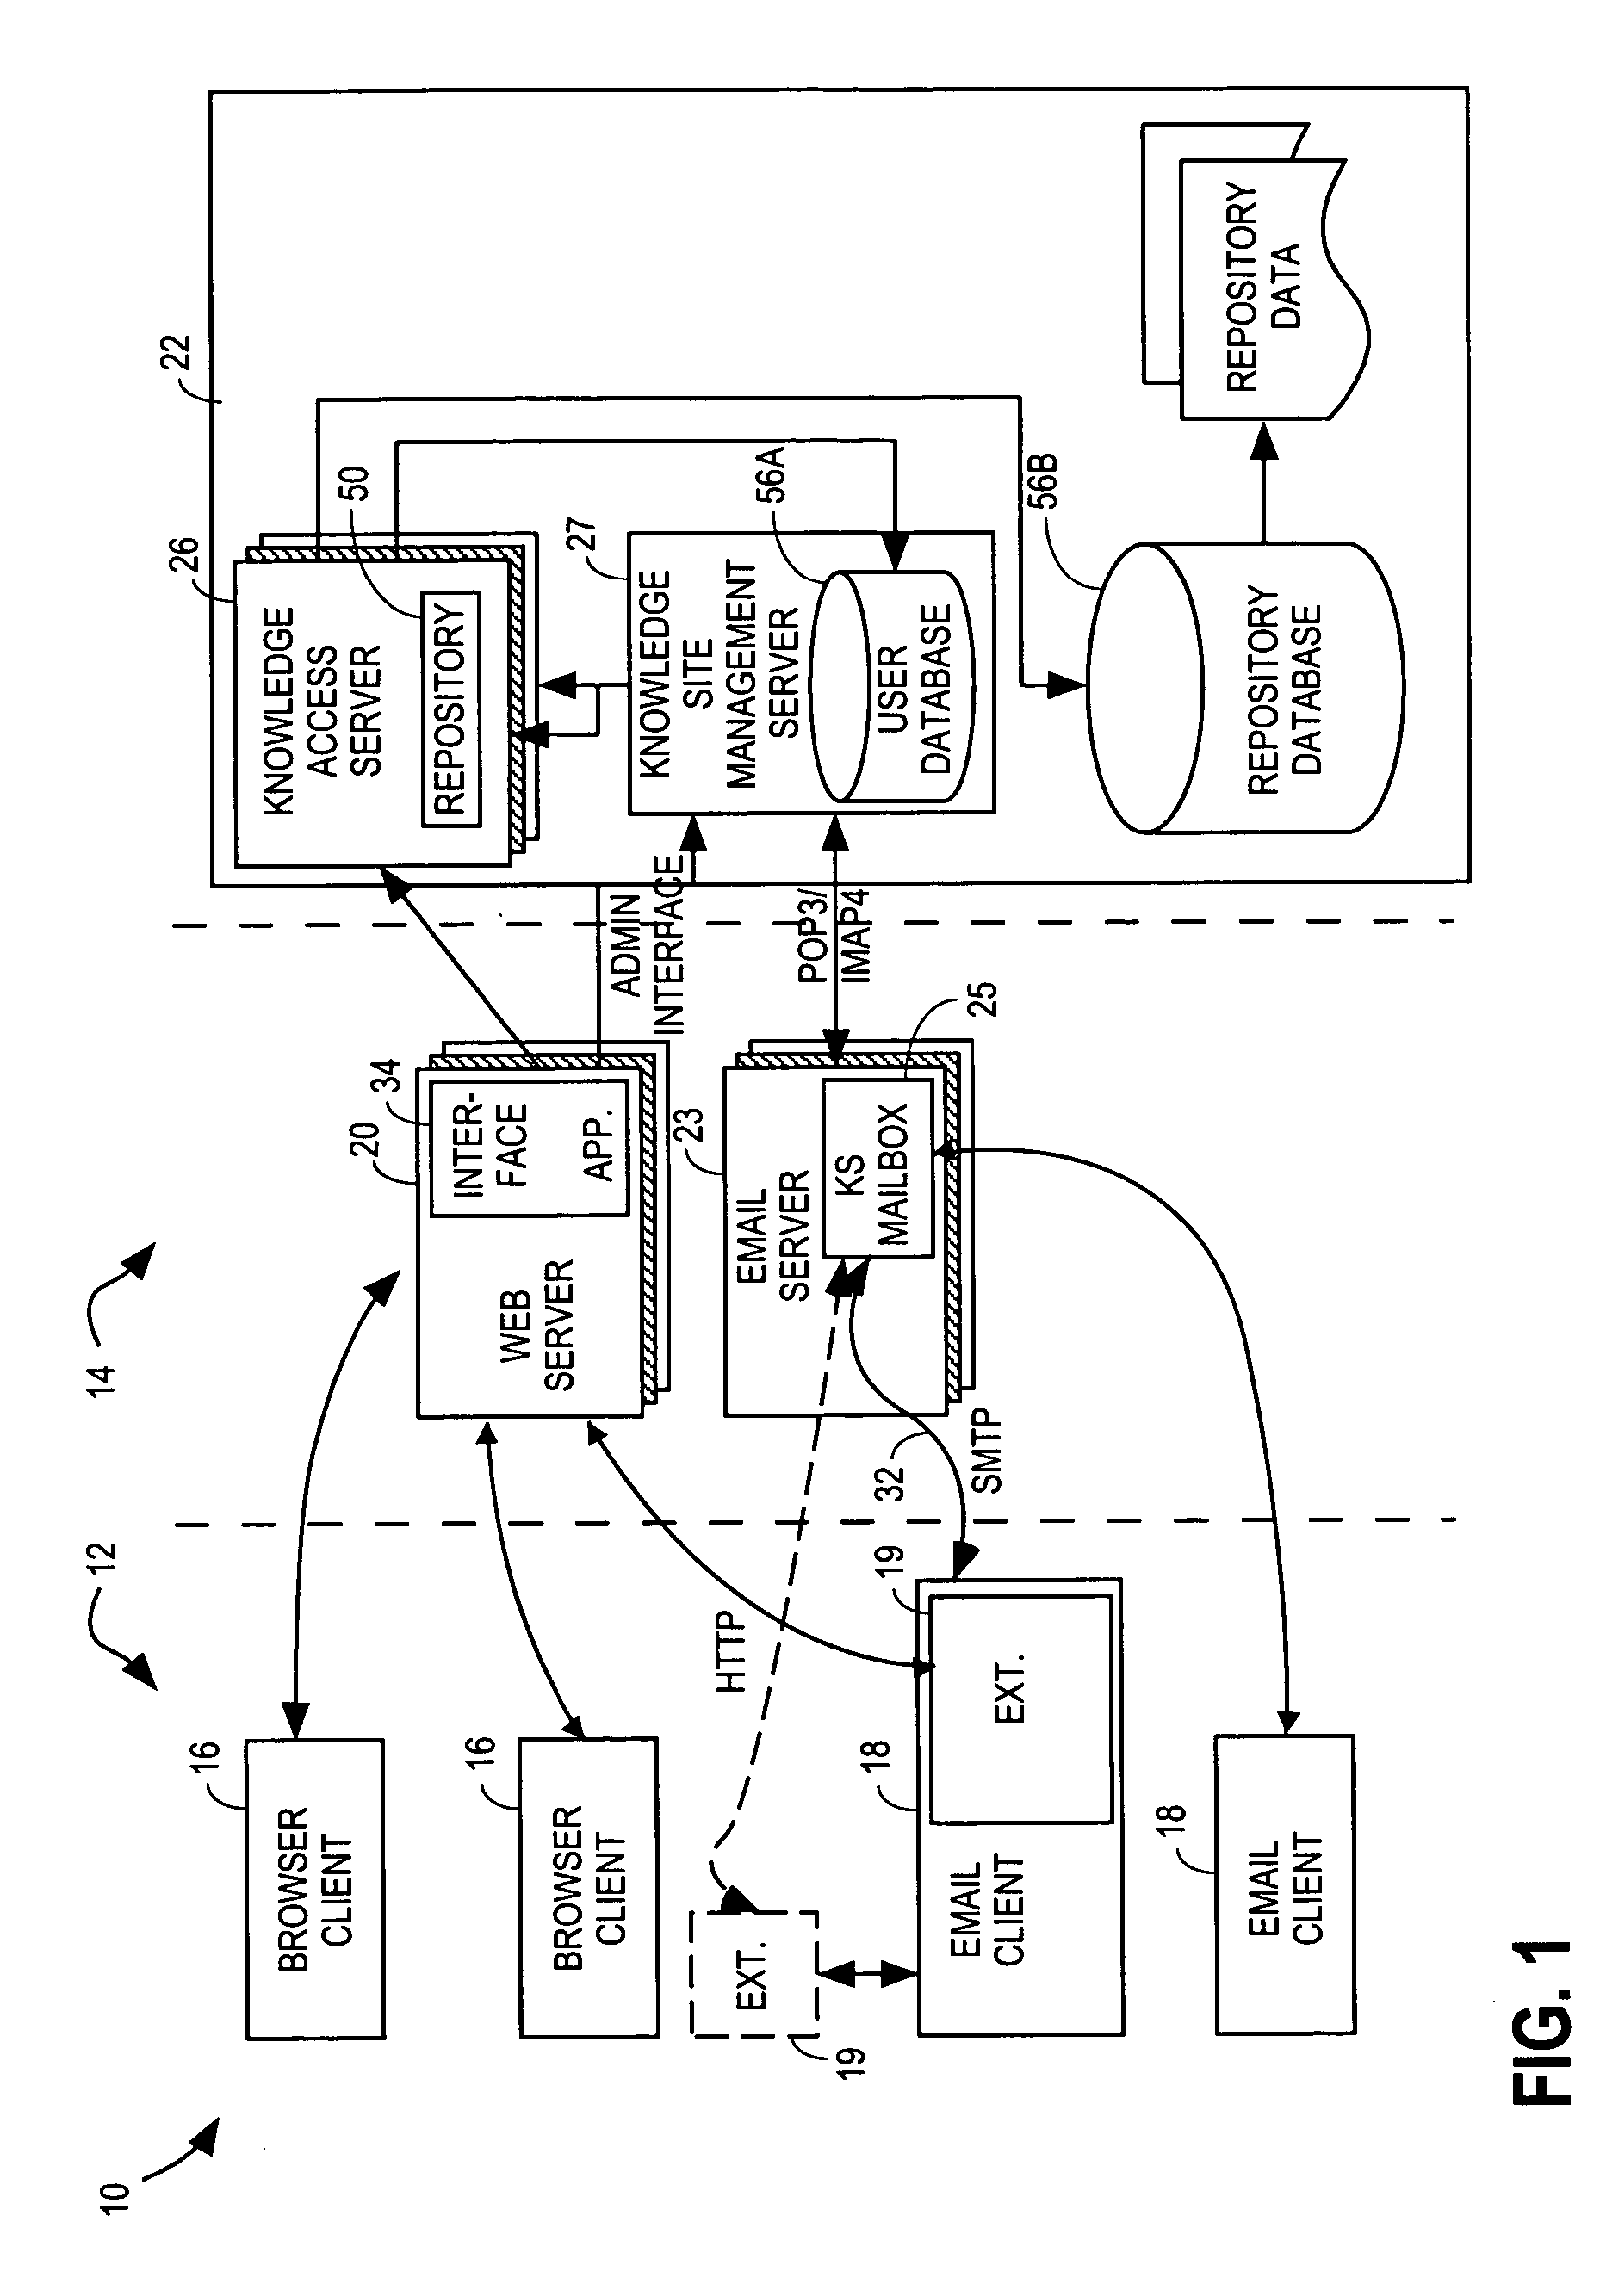 Method and apparatus for constructing and maintaining a user knowledge profile